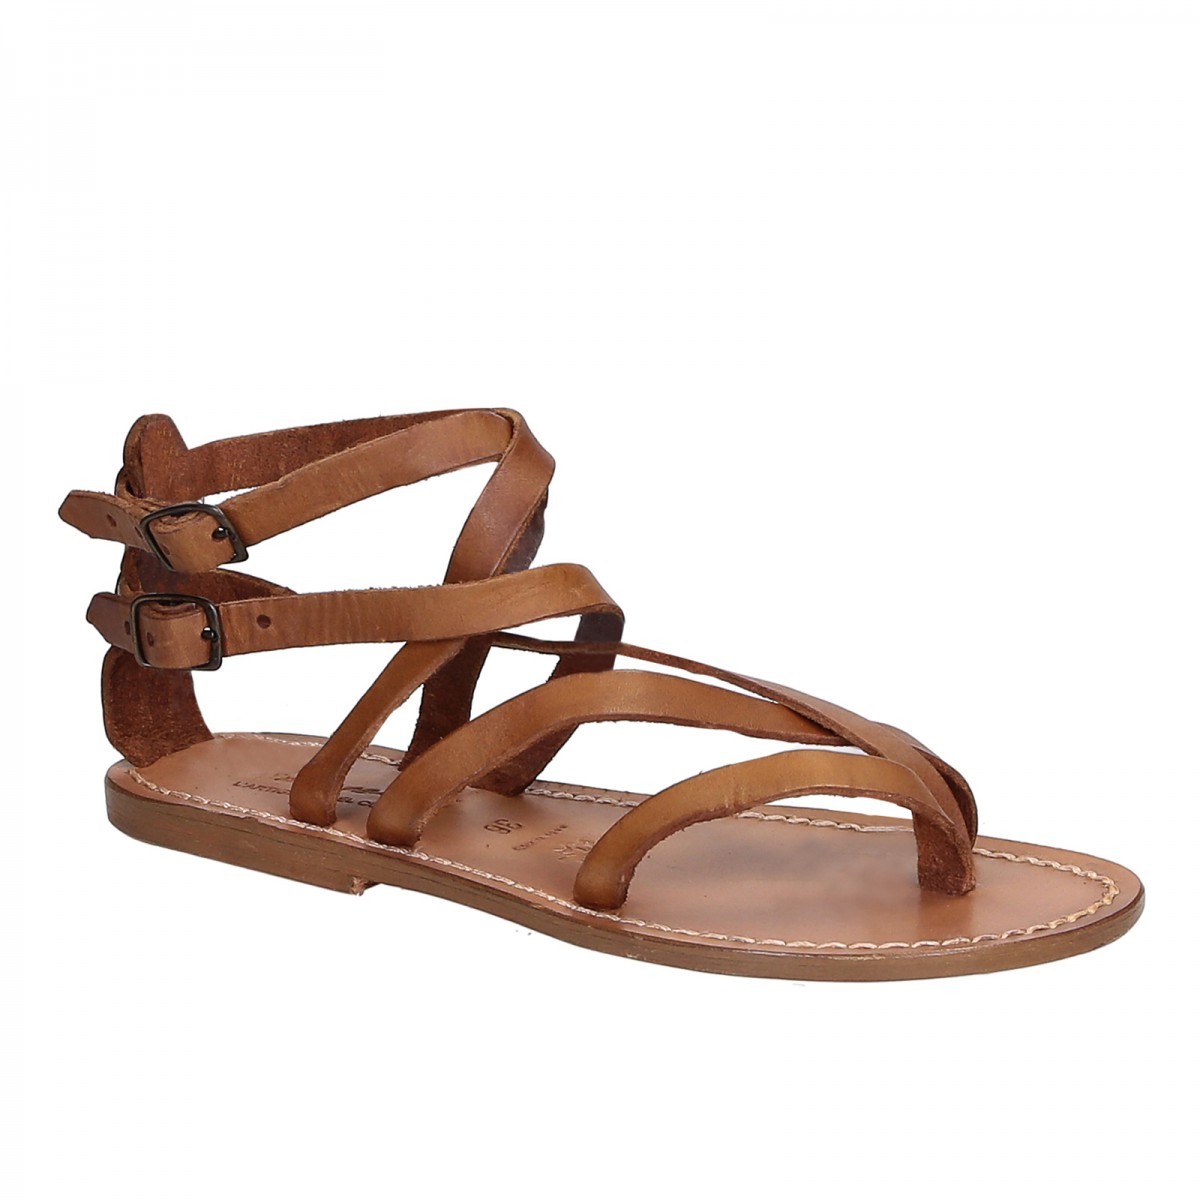 Handmade women's flat sandals in tan leather | The leather craftsmen